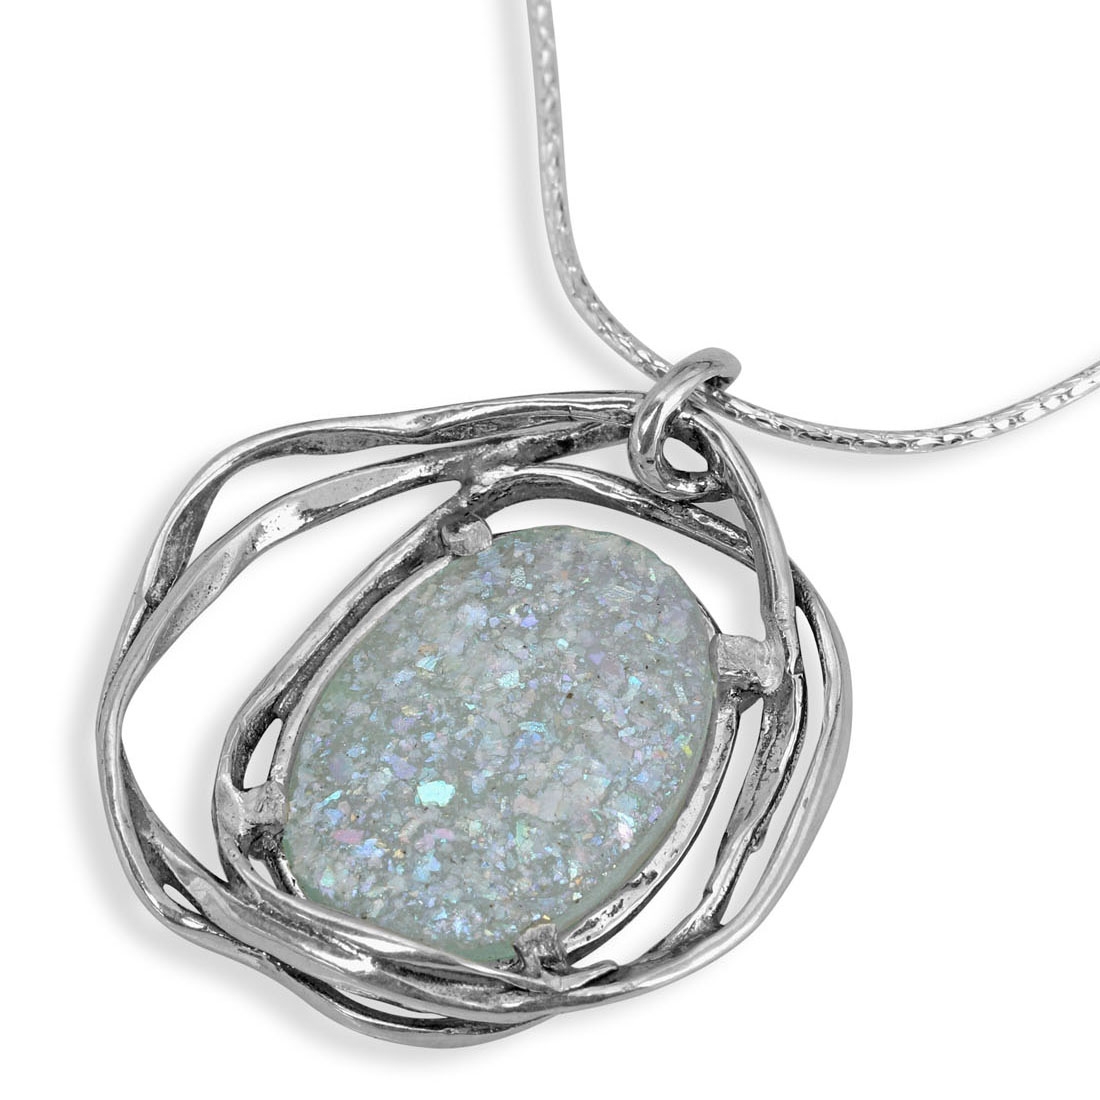 Moriah Jewelry Oval 925 Sterling Silver and Roman Glass Necklace - 1